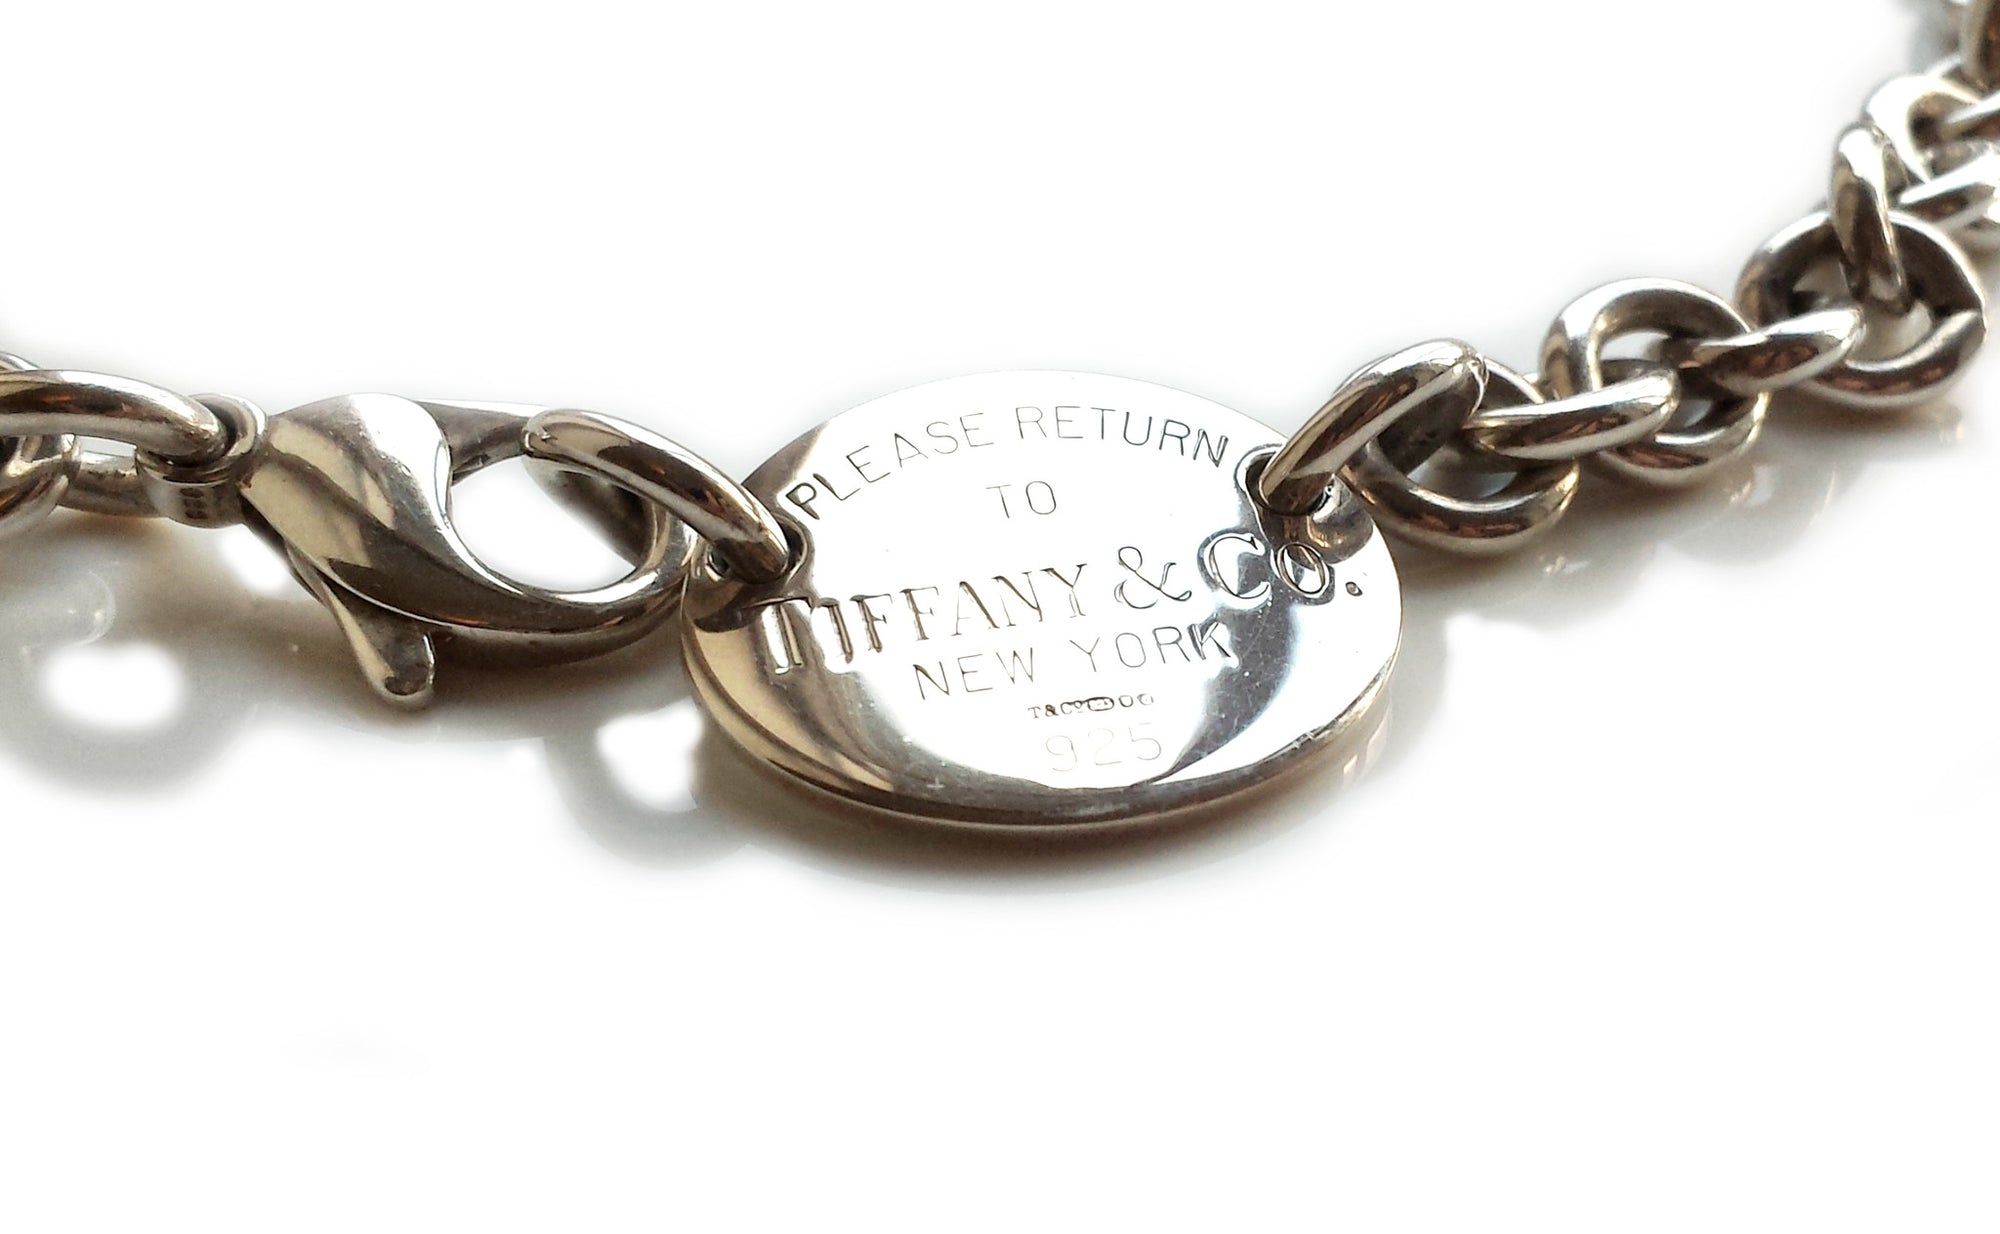 Tiffany & Co Sterling Silver Please Return To Choker/Necklace 15in